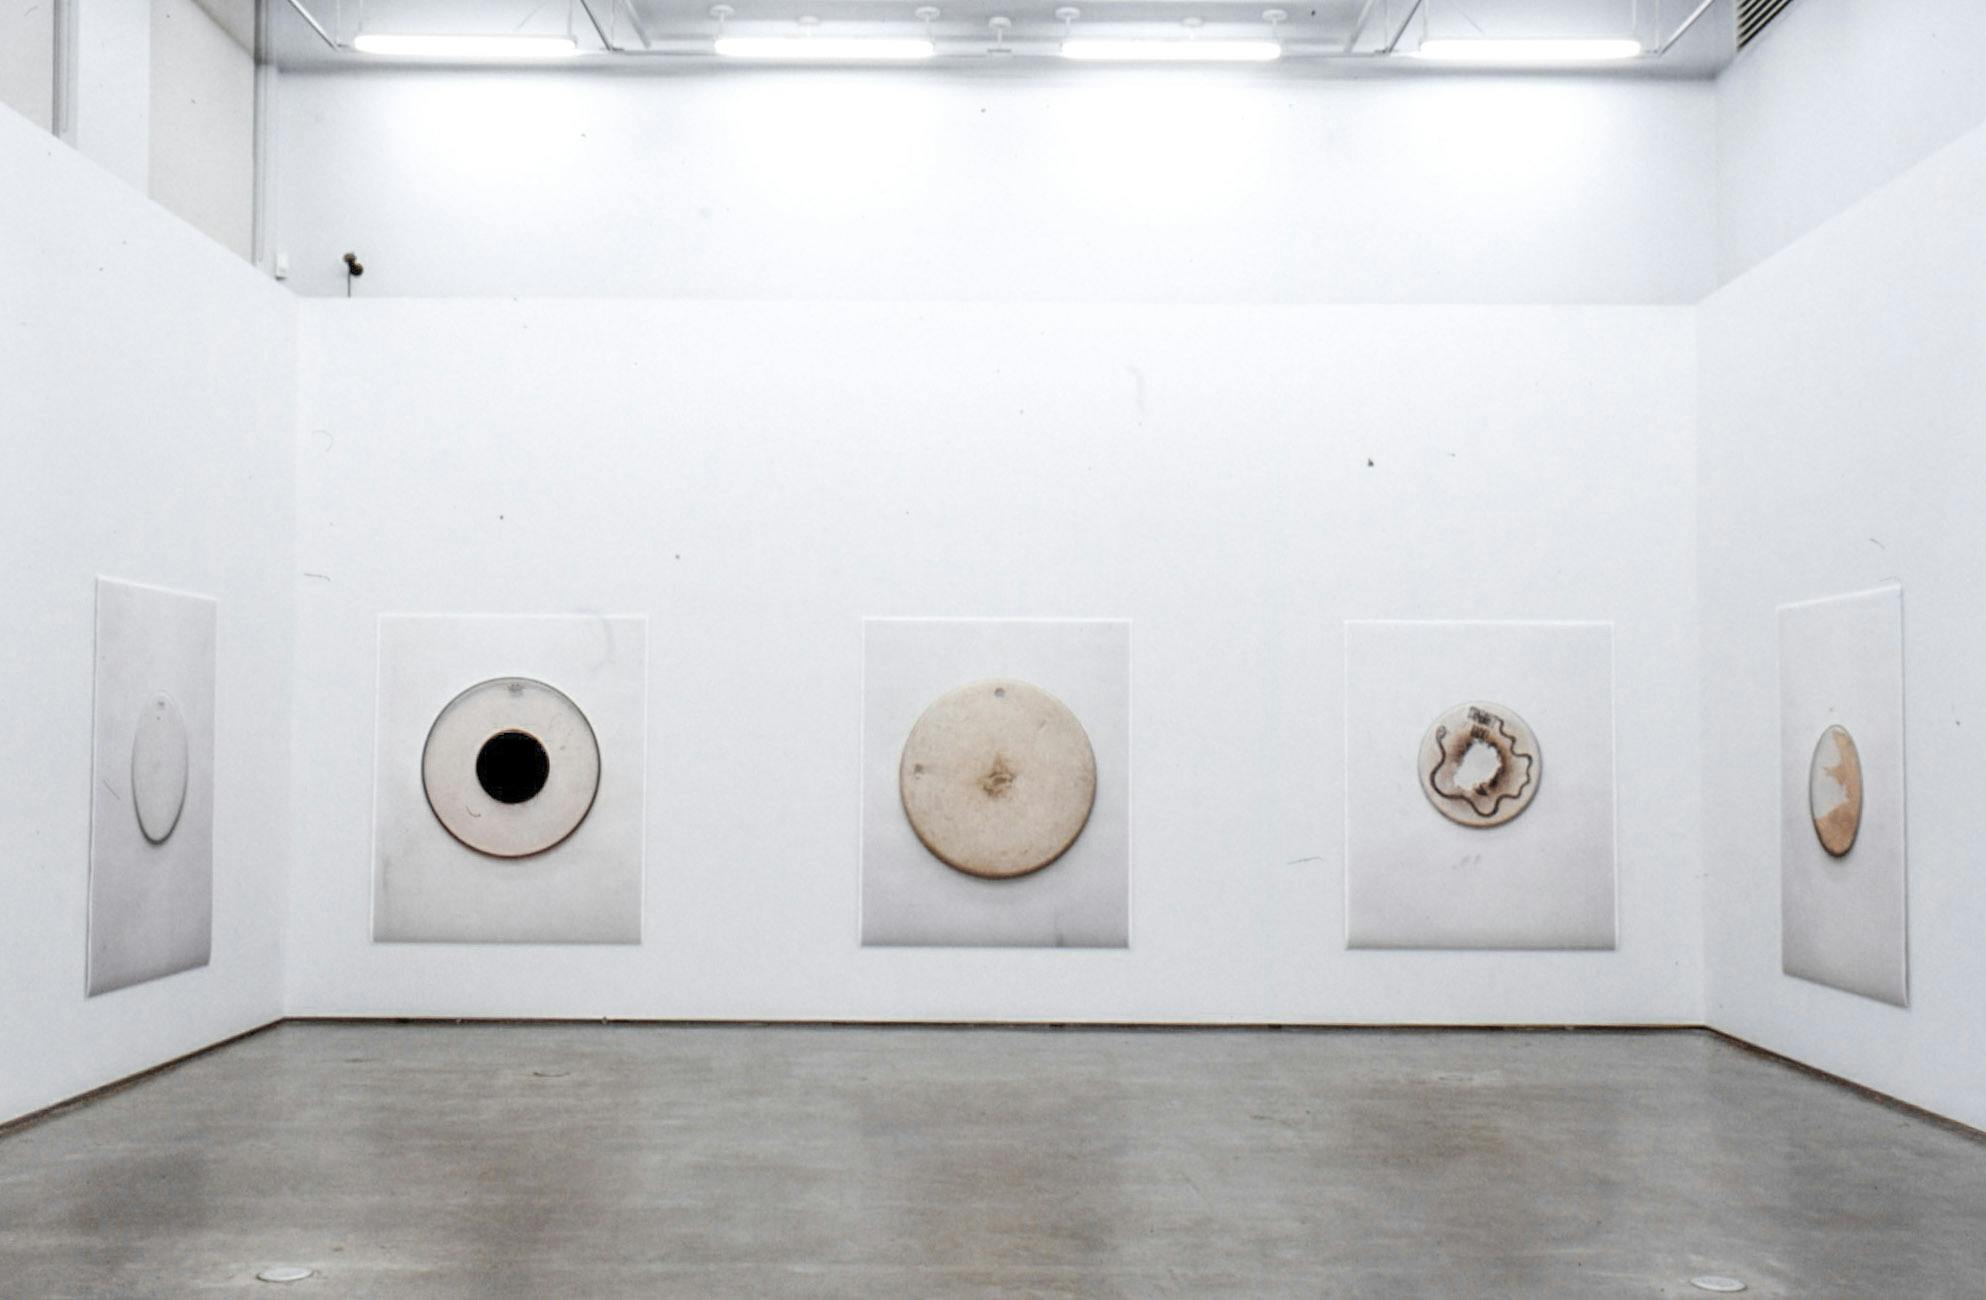 Five large-sized coloured photographs are installed on the gallery walls. They are all same-sized, and each of them depicts a different circular-shaped flat object in the middle.